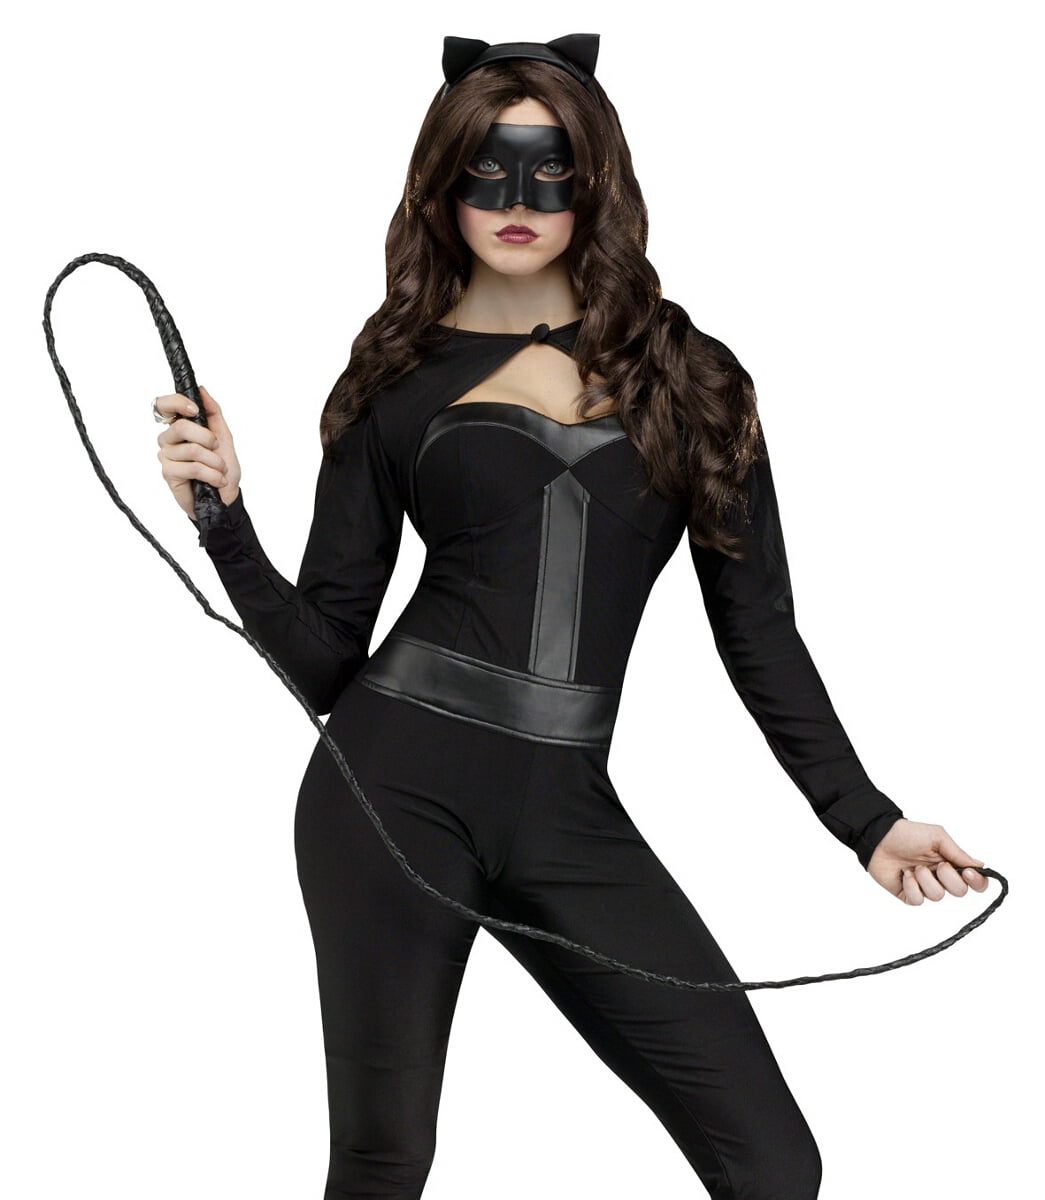 The Avengers Black Widow Bustier Adult Costume Disguise 69748 